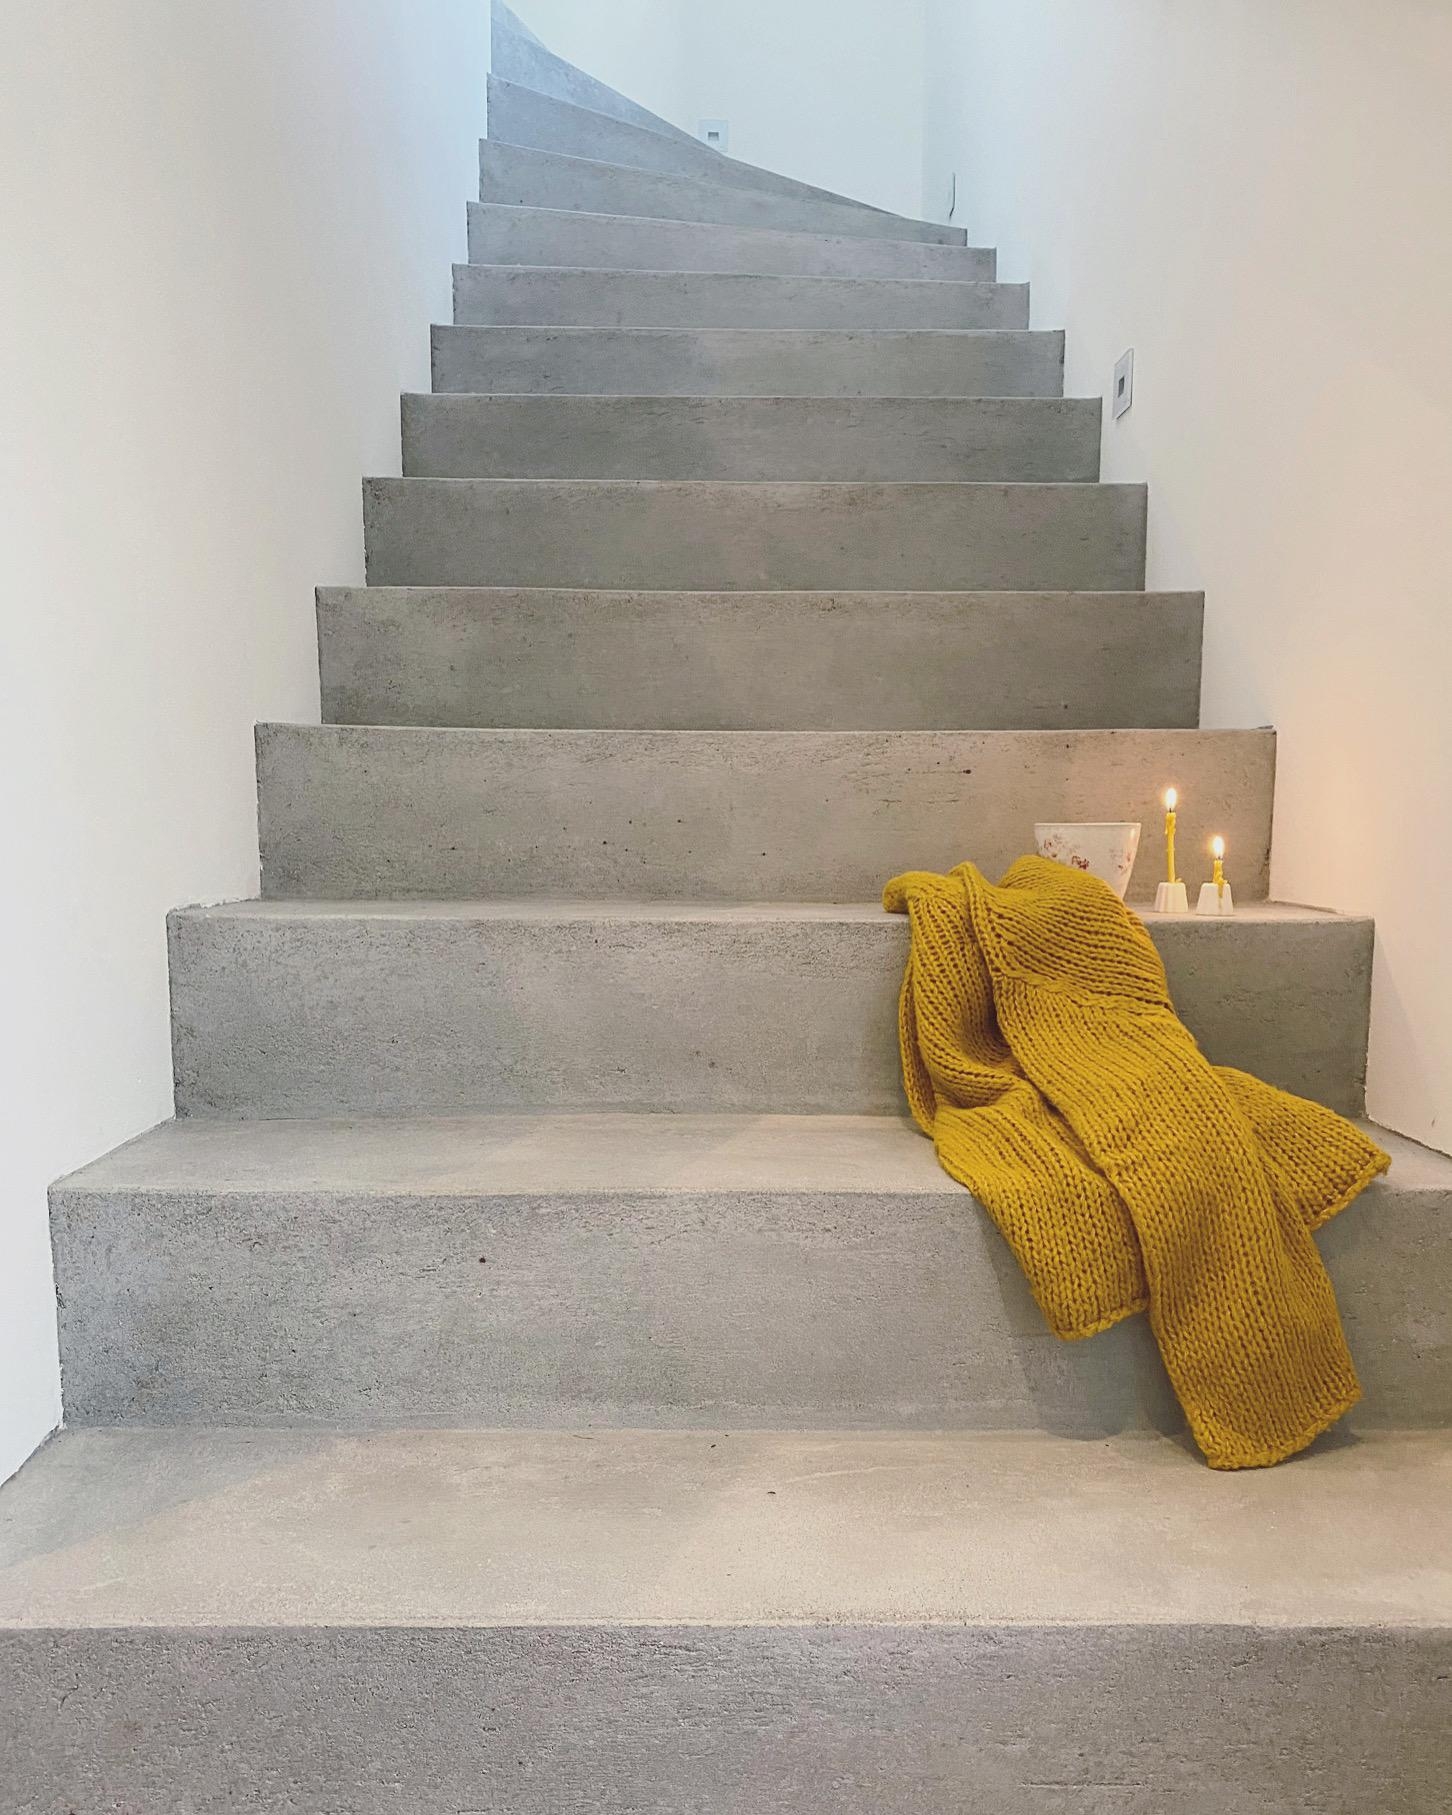 Simple things made beautiful 💛
#sichtbetontreppe#treppenhaus#interior#betontreppe#couchliebt#hygge#cozy